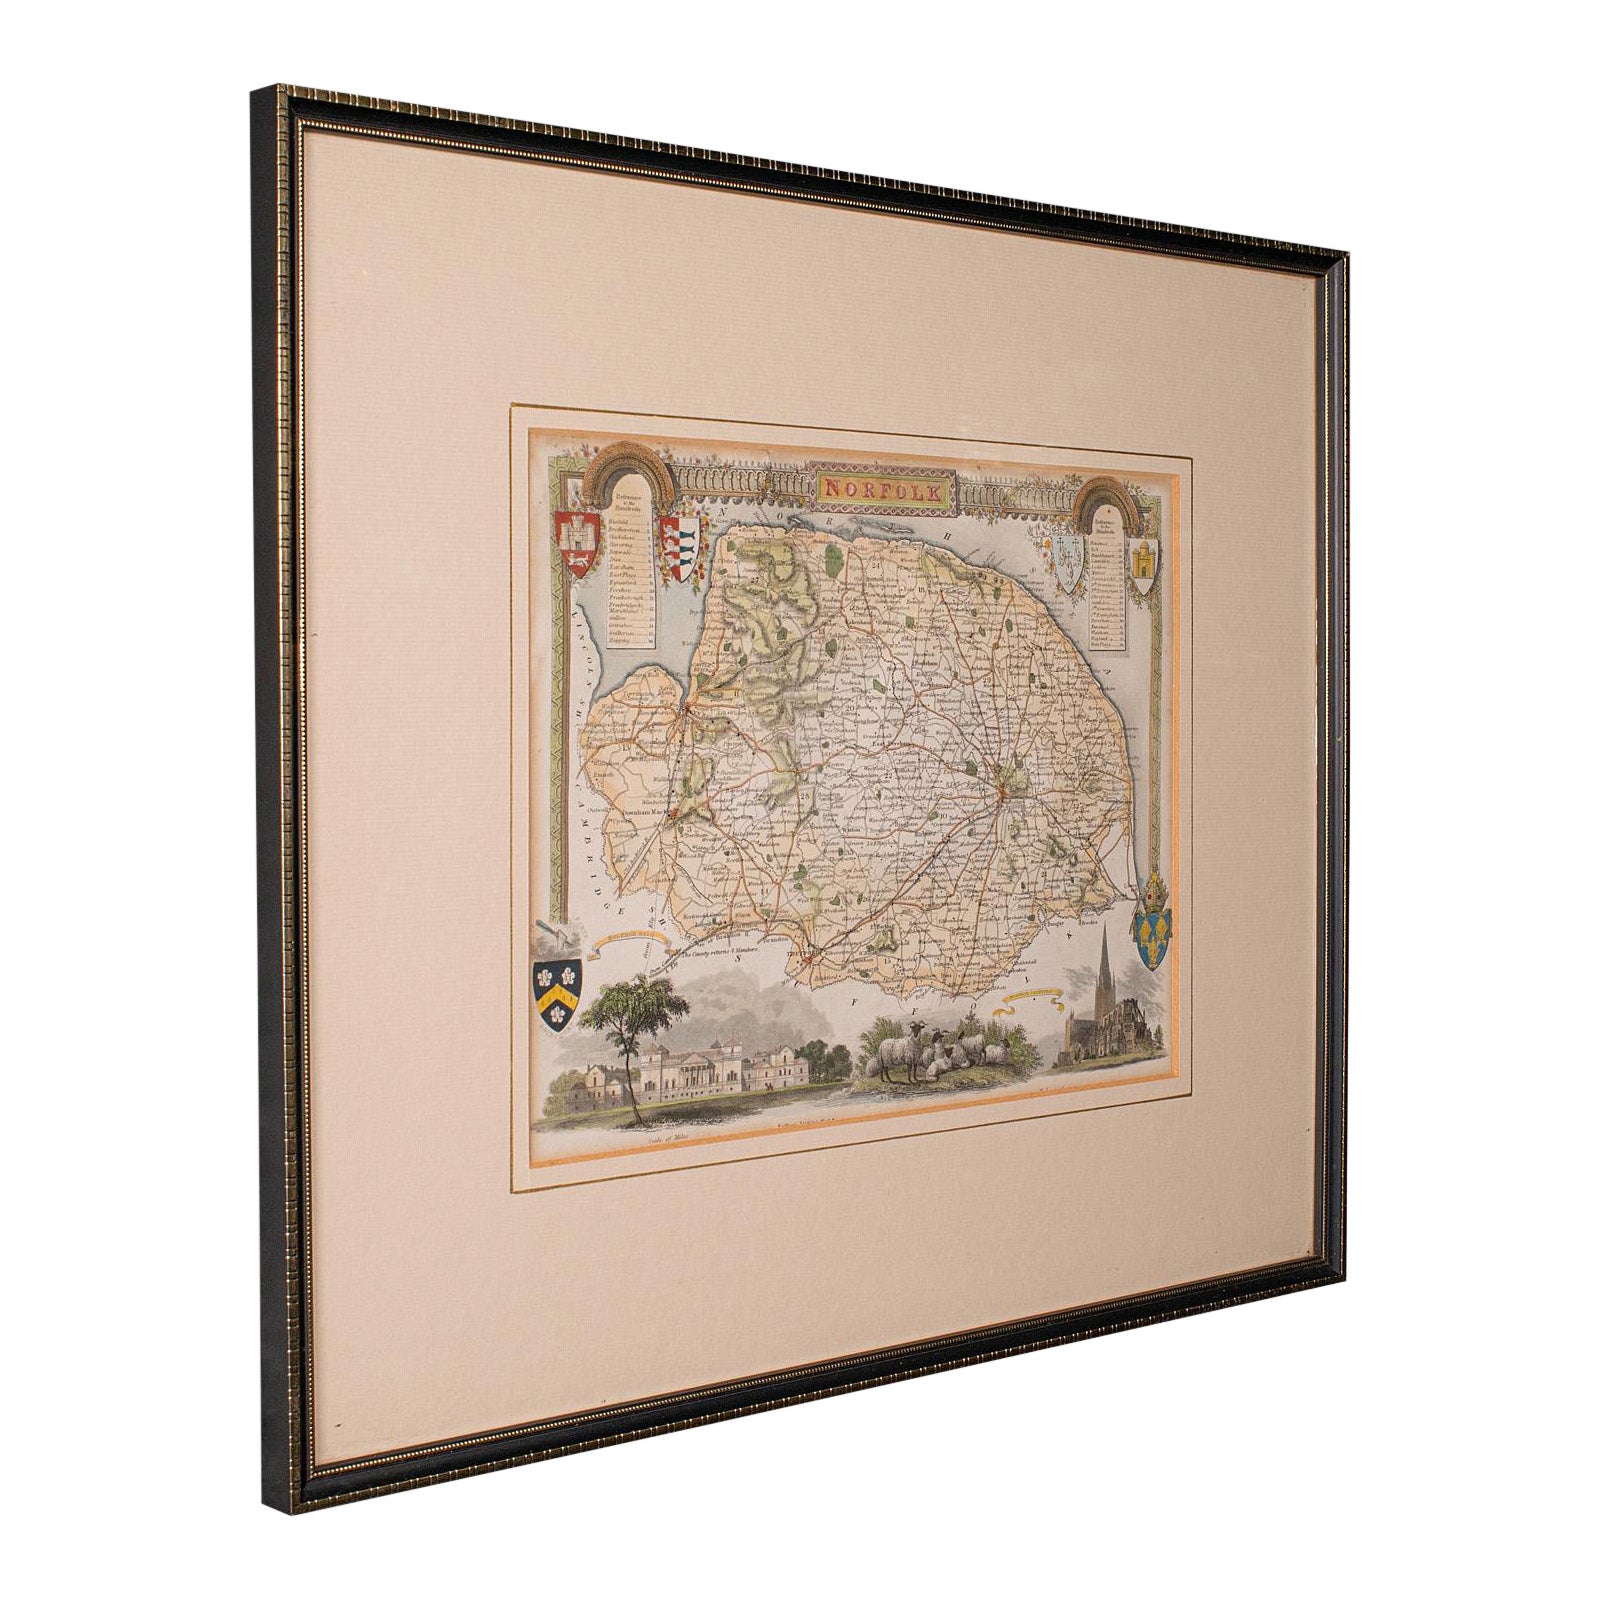 Antique County Map, Norfolk, English, Framed Lithography, Cartography, Victorian For Sale